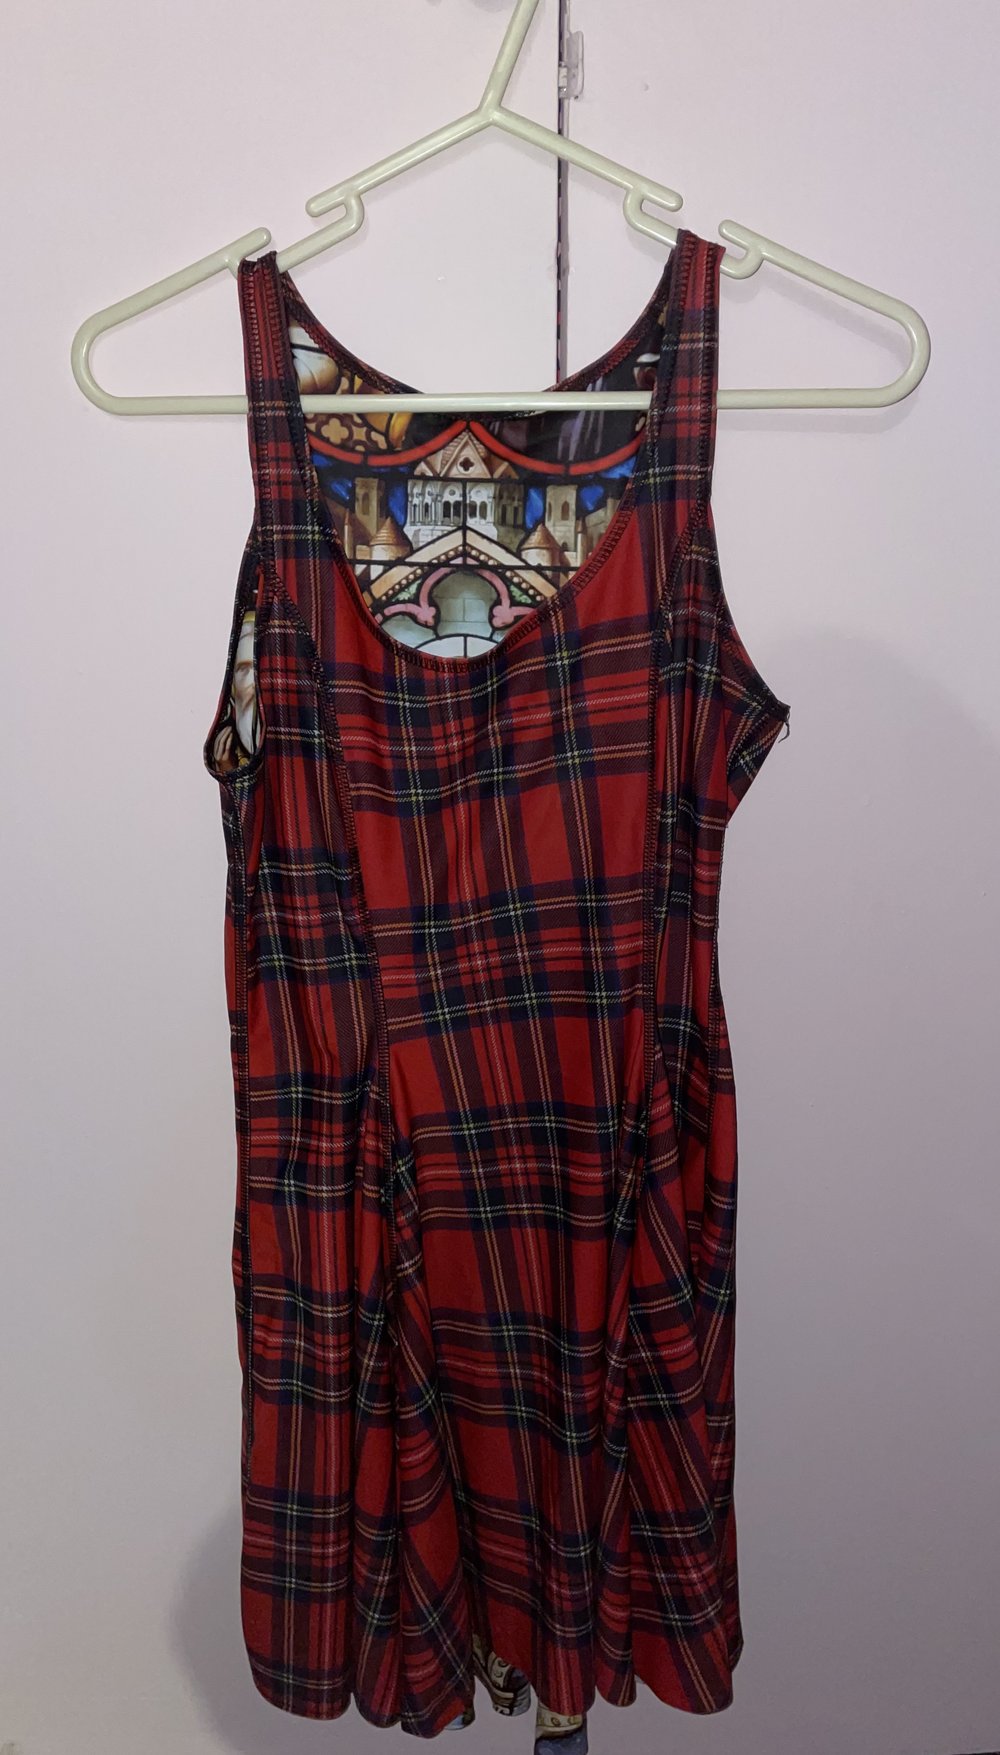 Black Milk Clothing - Tartan Red vs Cathedral Inside Out Dress